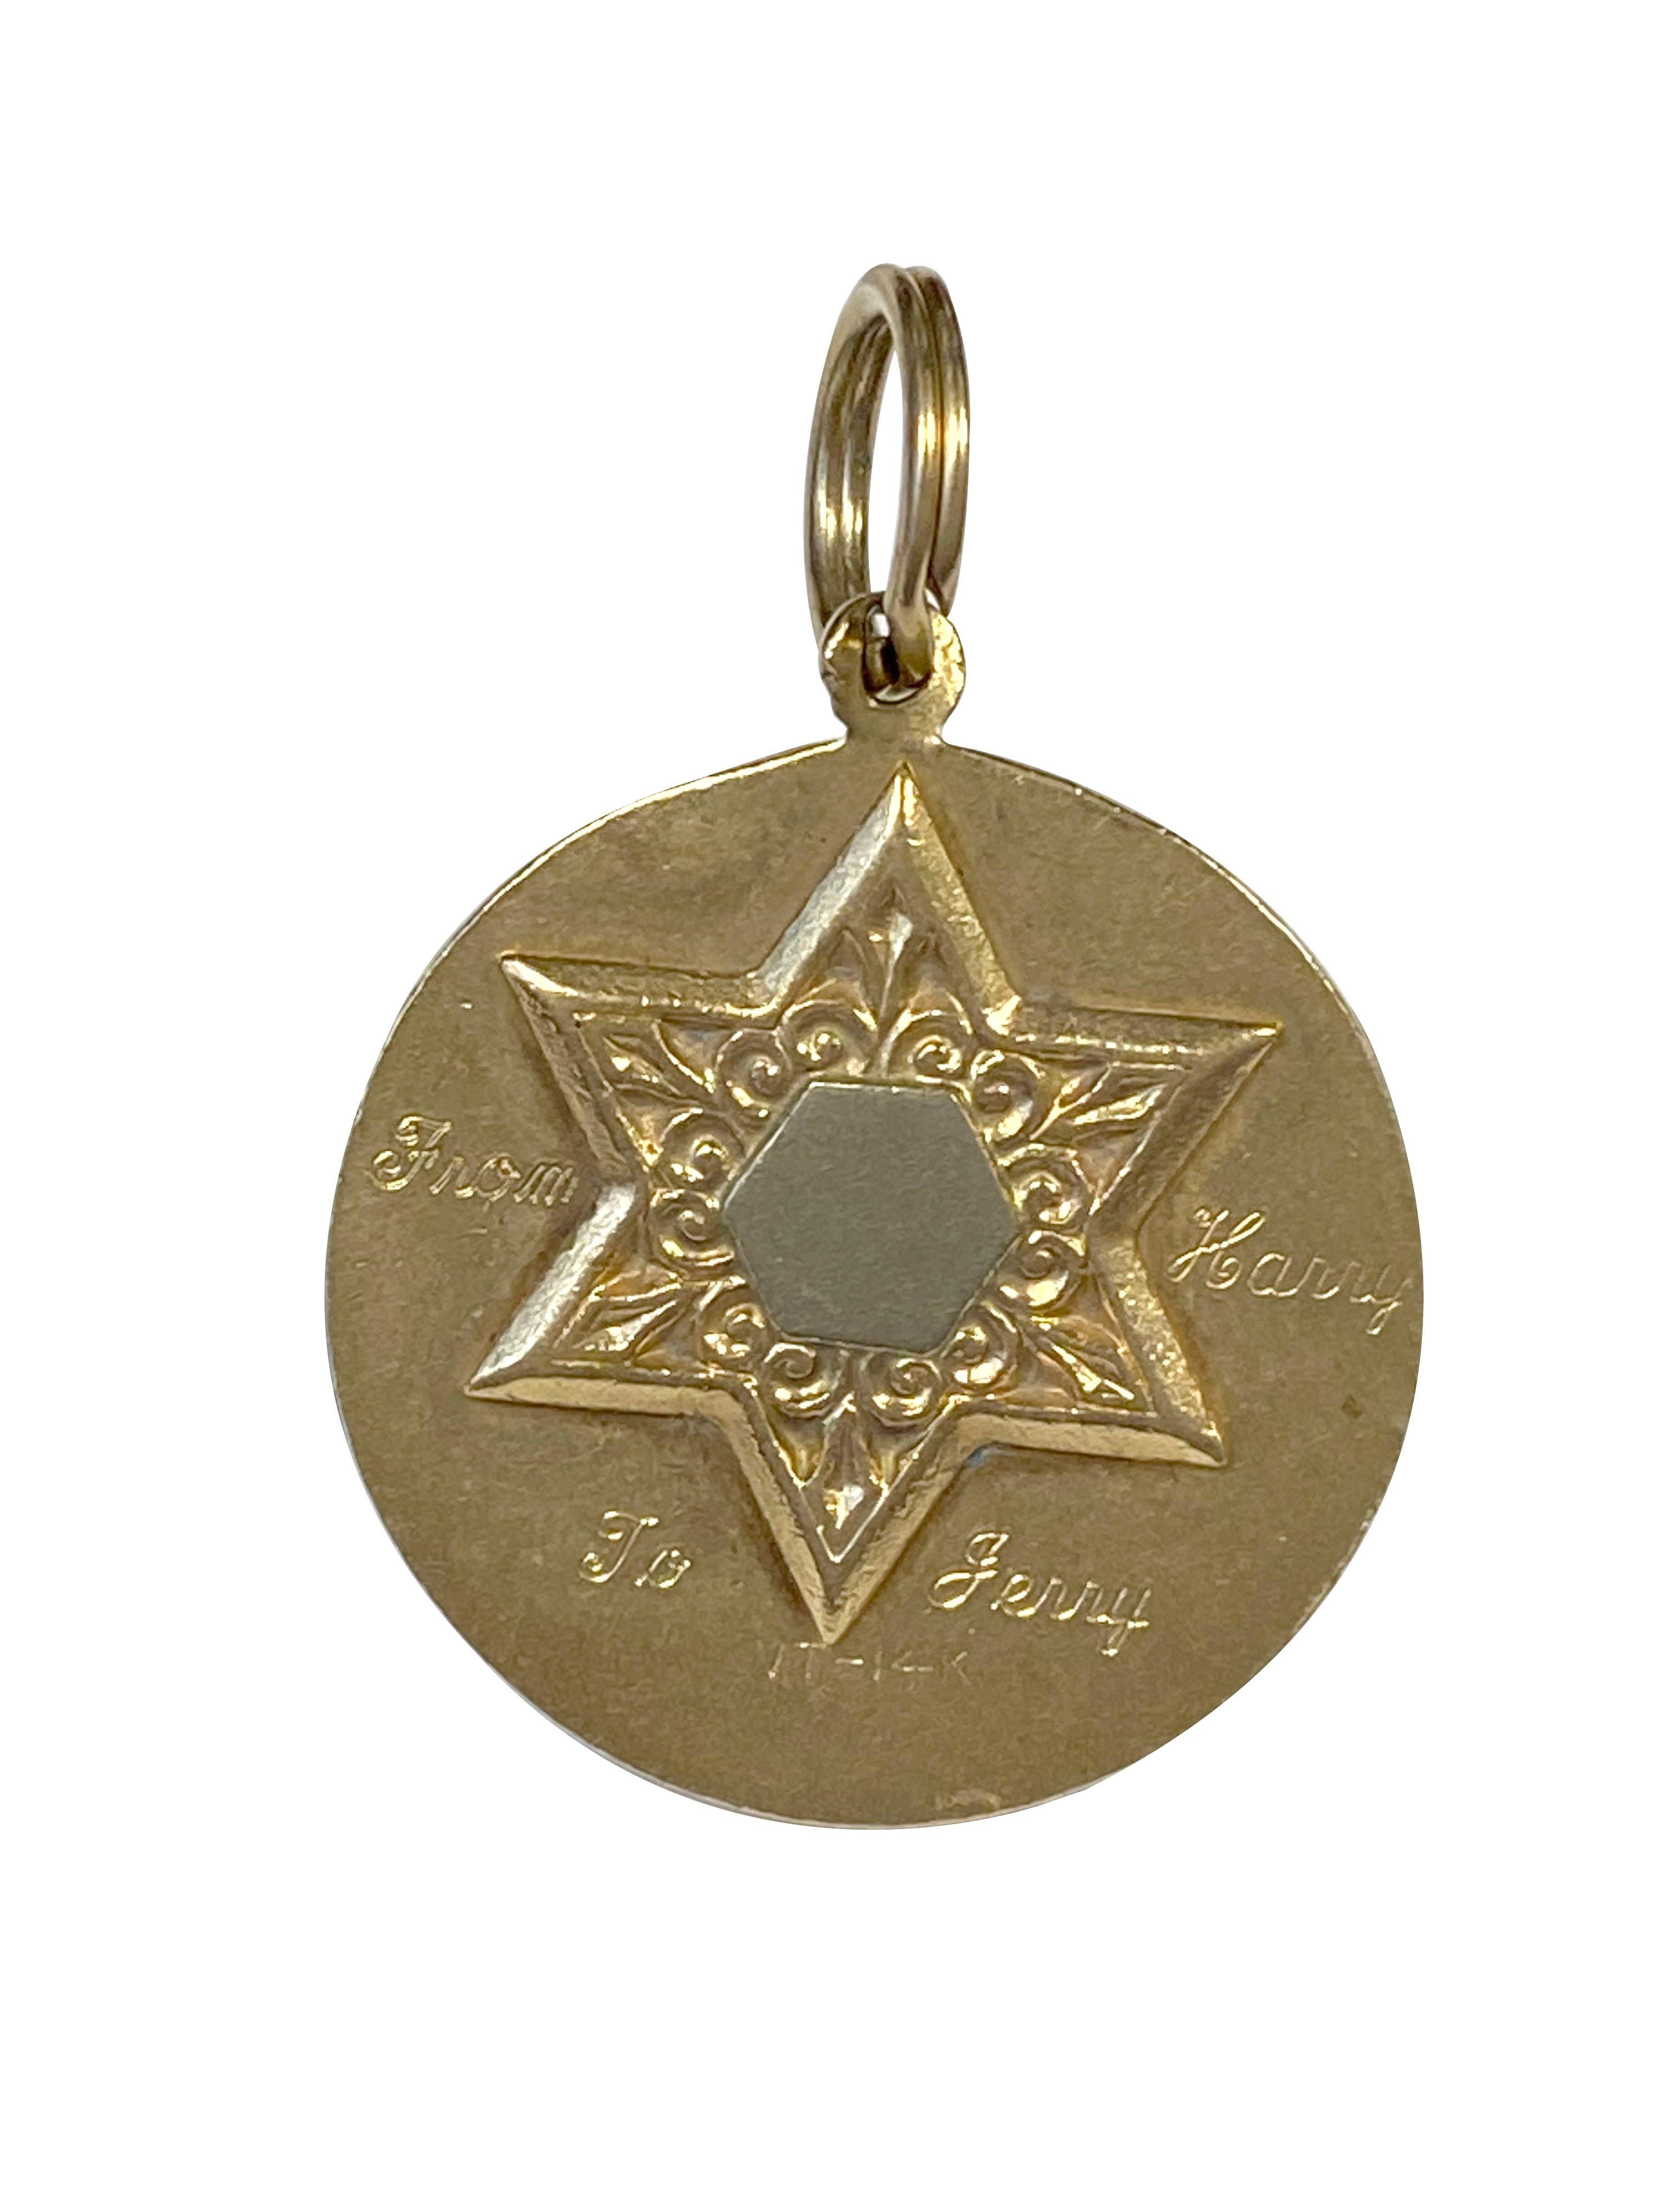 Circa 1960s 14k Yellow Gold pendant  / medal  owned and worn by Hollywood Icon Jerry Lewis, measuring 1 inch in diameter and weighing 6.4 Grams. The figural St. Christopher Medal has a Star of David on the Reverse with a personal engraving: 